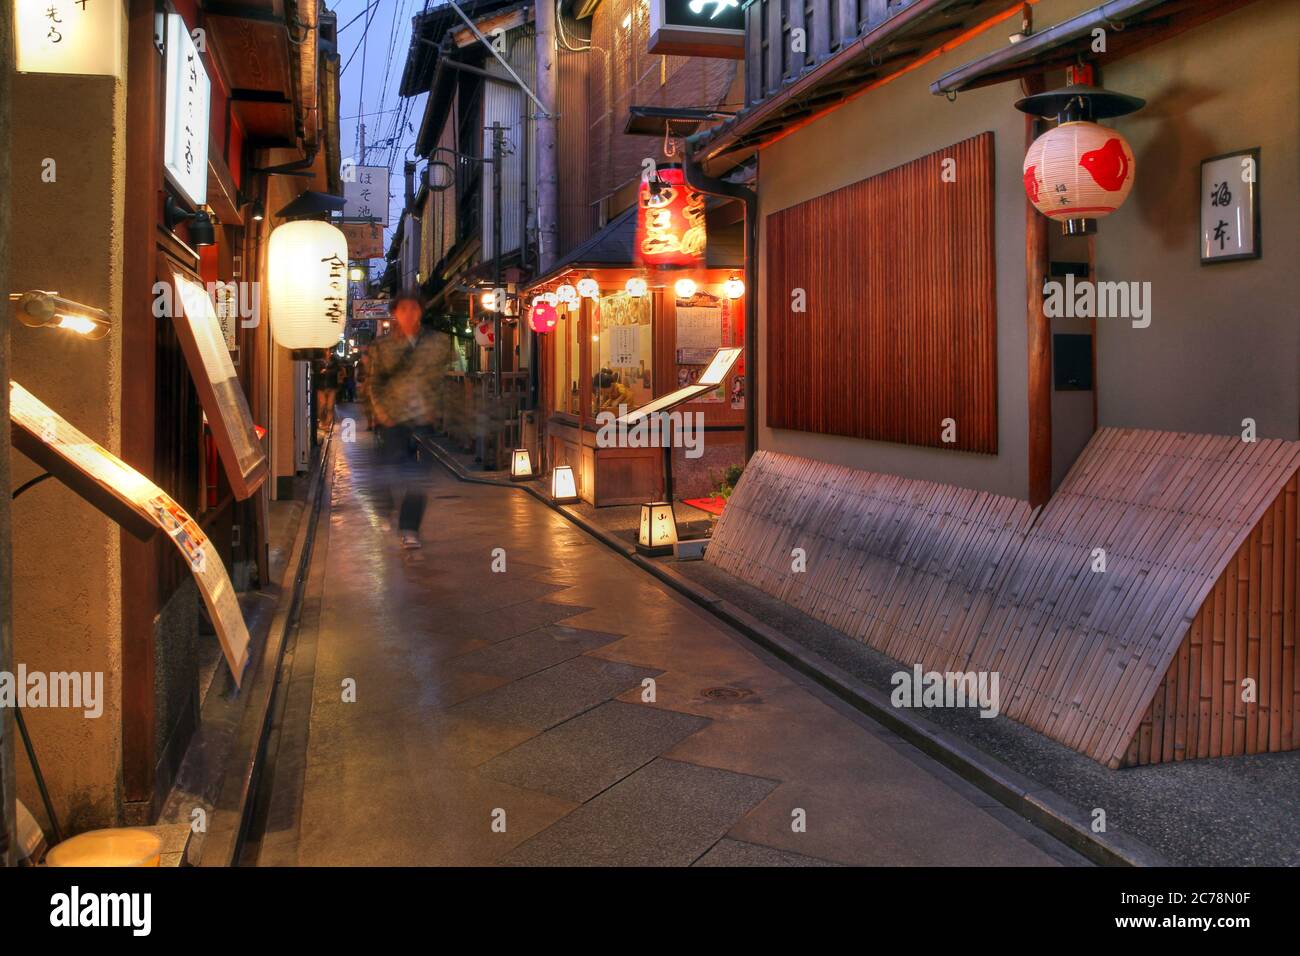 Kyoto, Japan - December 25, 2011: Narrow pedestrian street known as Pontocho alley in the old part of Kyoto, Japan at night. Pontocho alley used to be Stock Photo